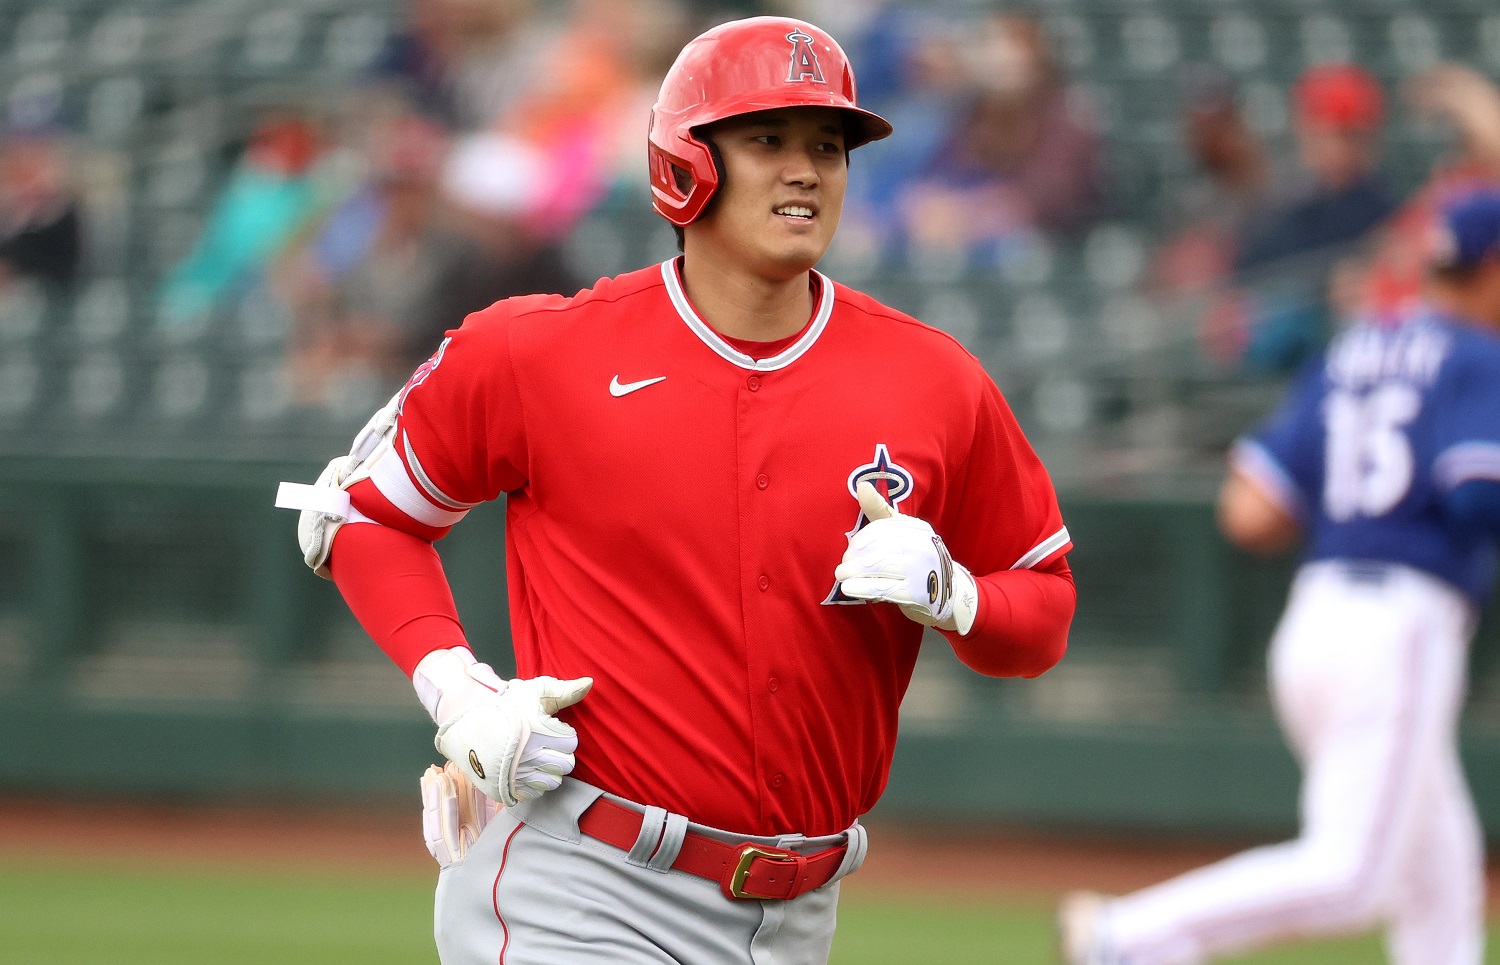 Shohei Ohtani was the 2018 AL Rookie of the Year after pulling off a feat not seen since Babe Ruth in 1919. | Abbie Parr/Getty Images